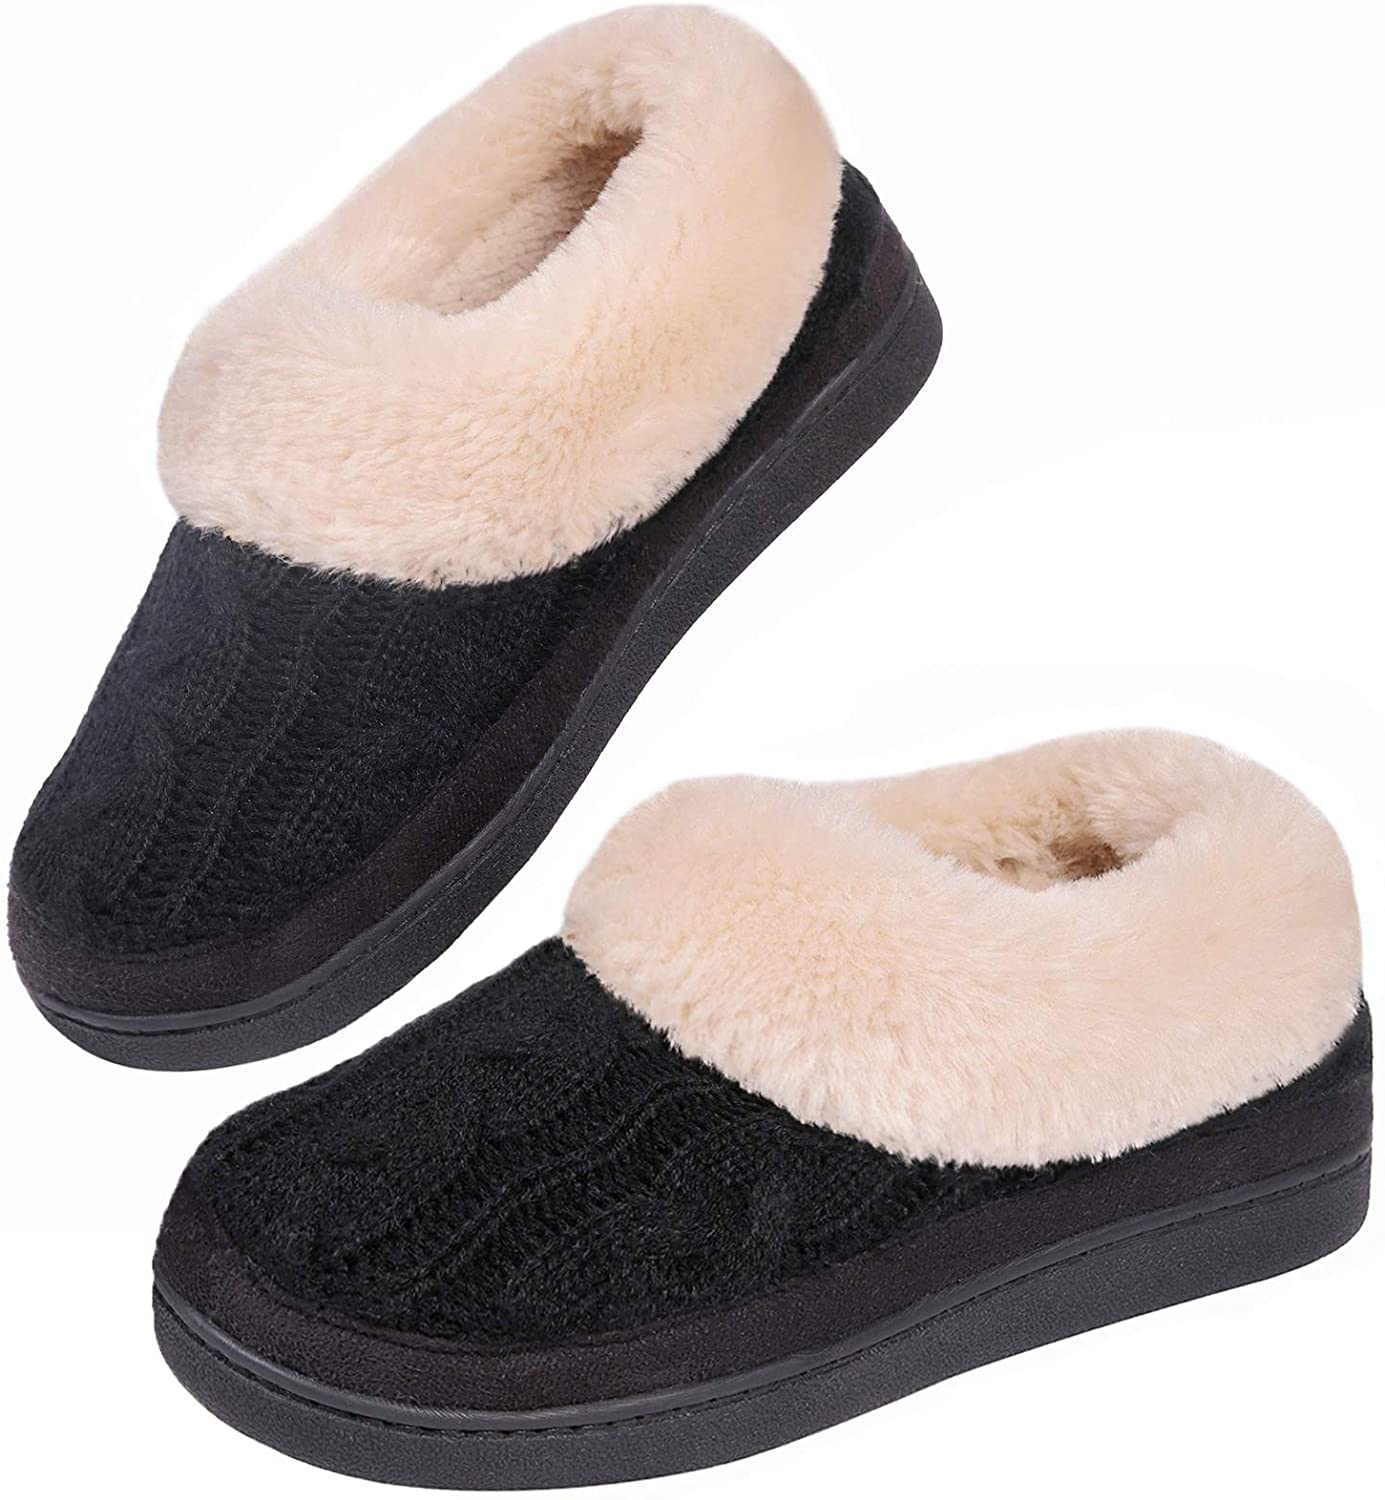 HomeTop Women/'s Classic Cable Knit Memory Foam Bootie Slipper with Fuzzy Plush Lining